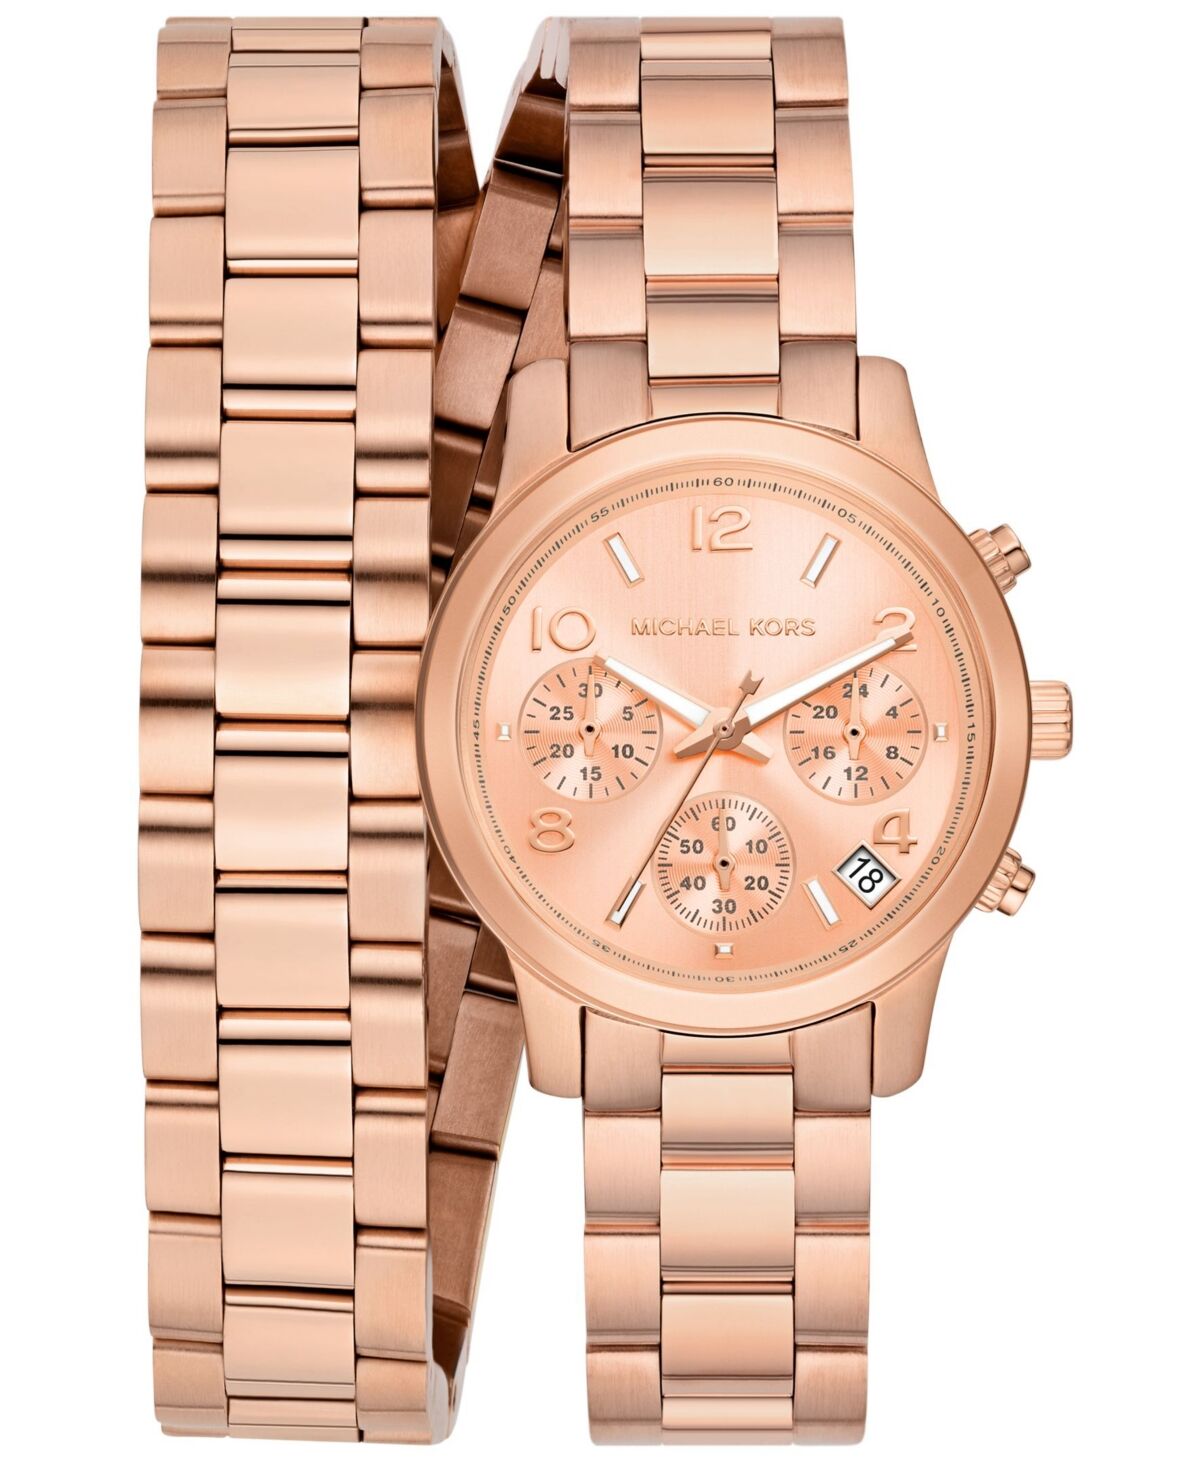 Michael Kors Women's Runway Chronograph Rose Gold-Tone Stainless Steel Double Wrap Bracelet Watch 34mm - Rose Gold-Tone